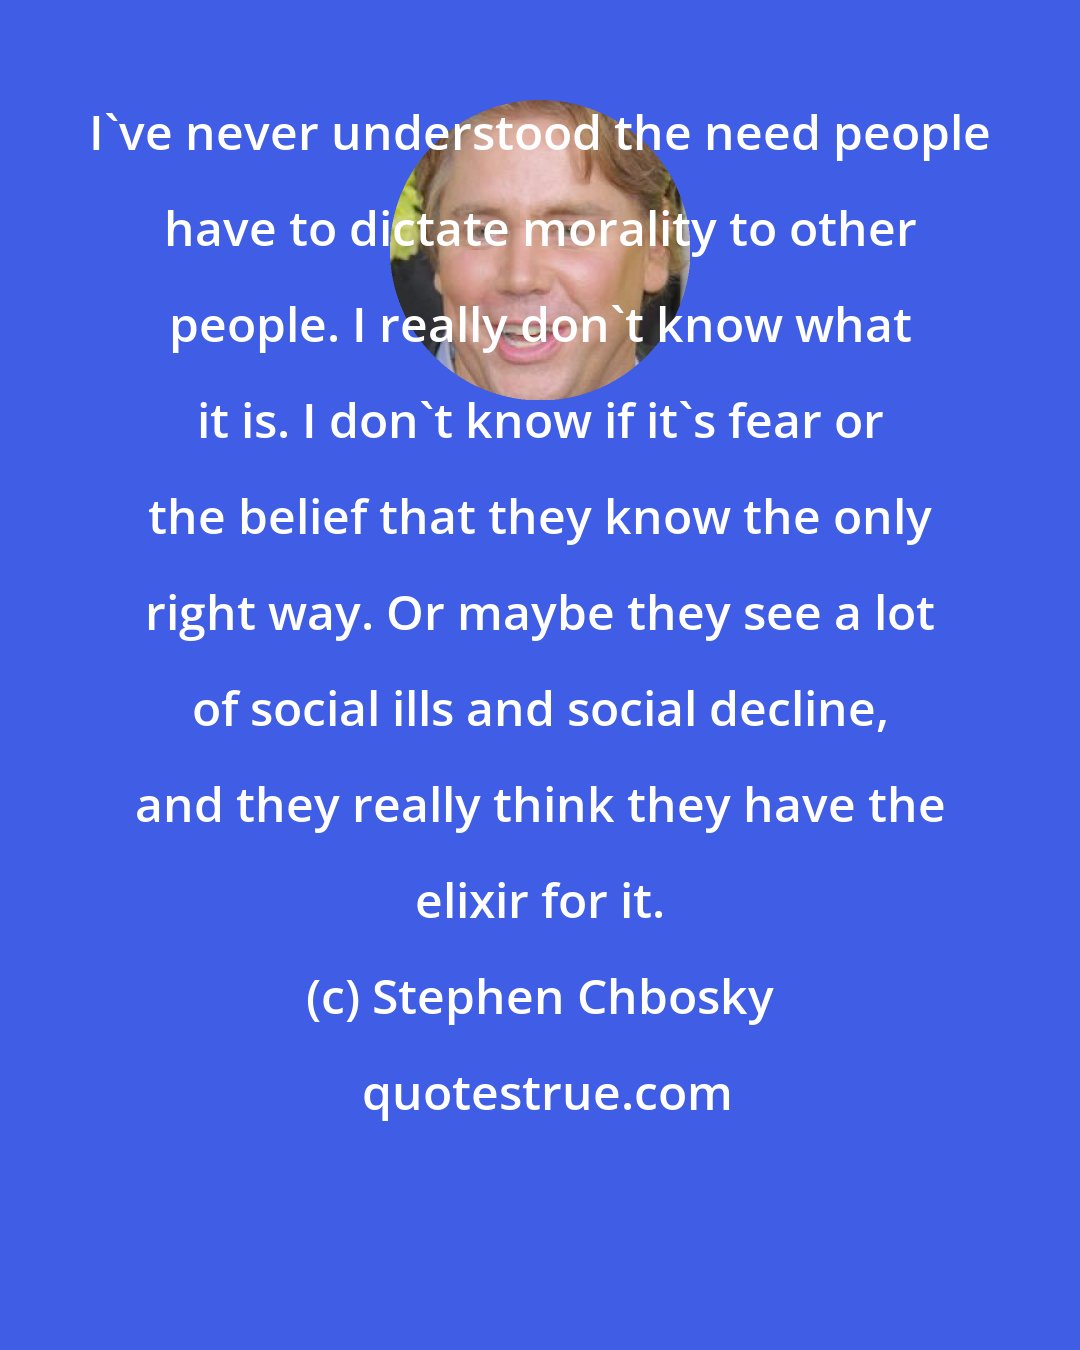 Stephen Chbosky: I've never understood the need people have to dictate morality to other people. I really don't know what it is. I don't know if it's fear or the belief that they know the only right way. Or maybe they see a lot of social ills and social decline, and they really think they have the elixir for it.